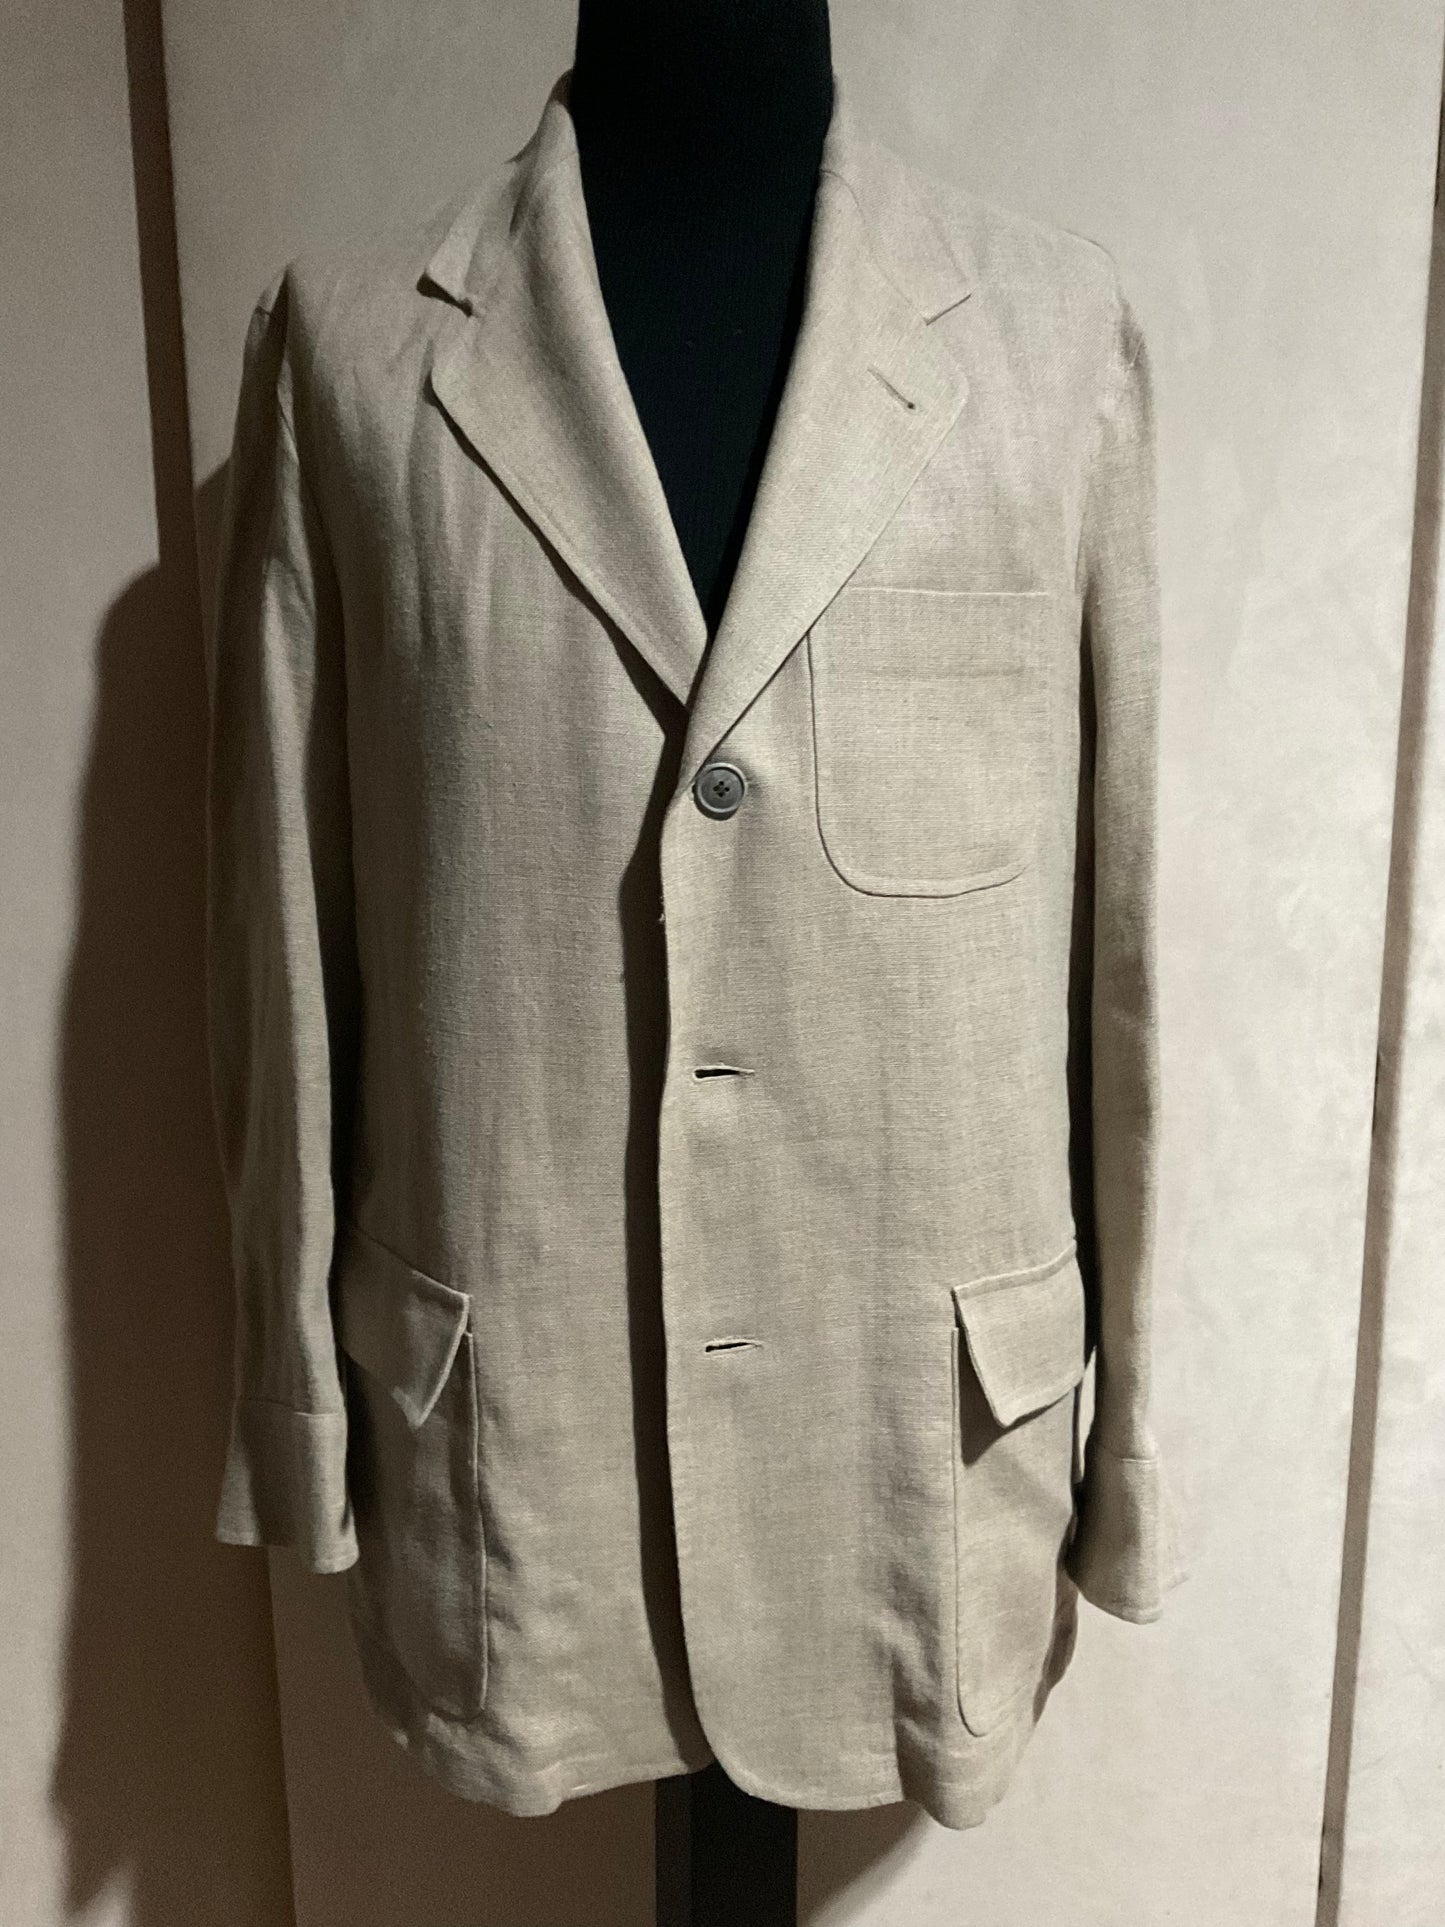 R P SPORTS JACKET / NATURAL LINEN / UNCONSTRUCTED / MEDIUM - LARGE / NEW / MADE IN USA